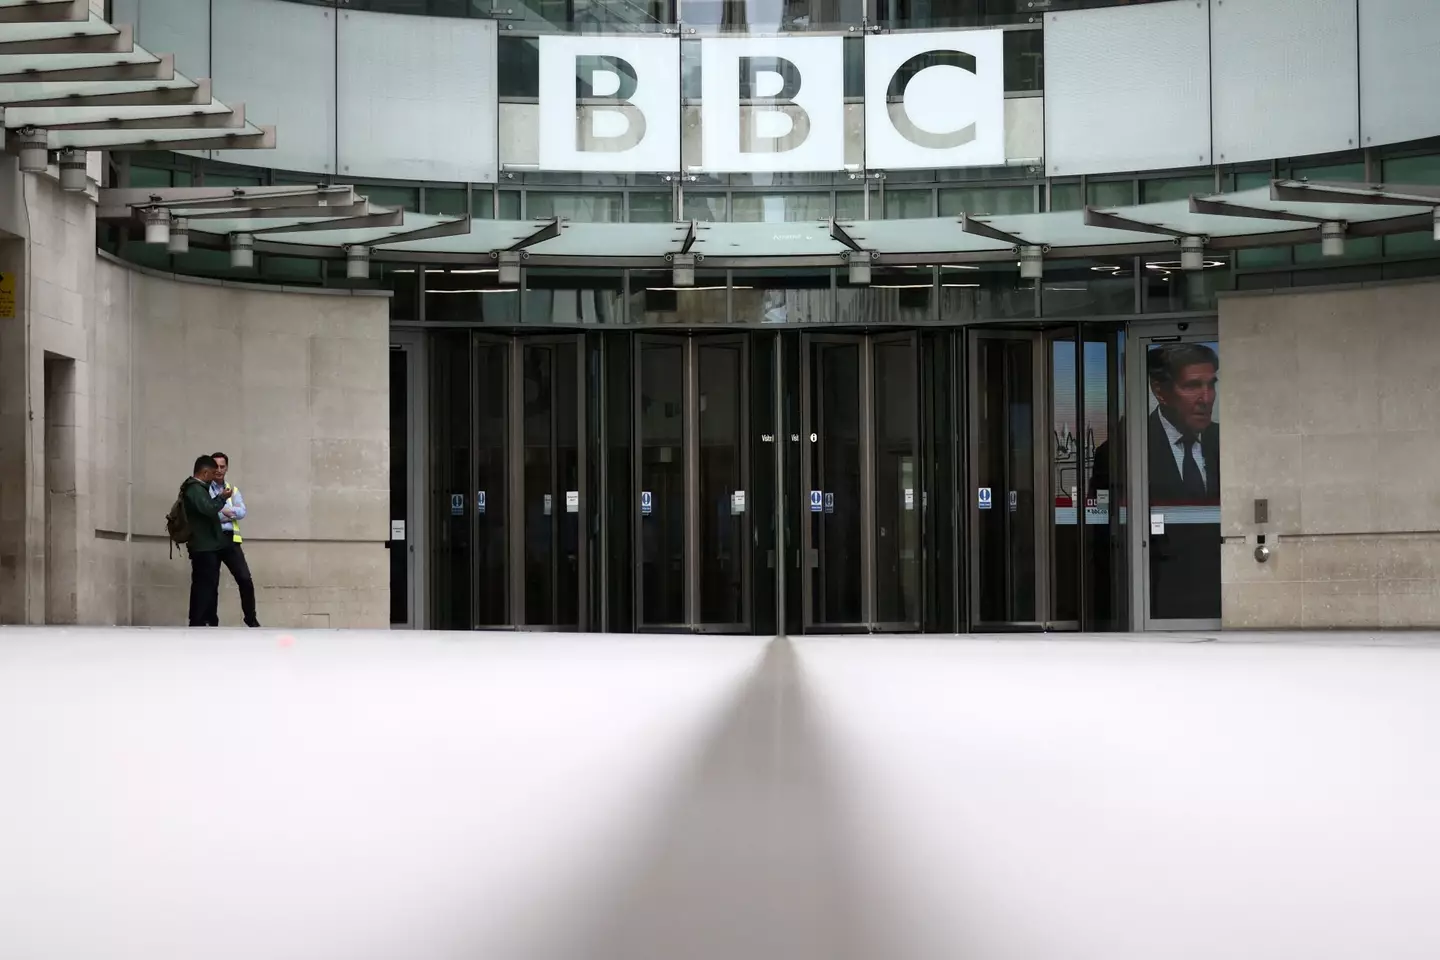 The BBC has suspended a male member of staff.